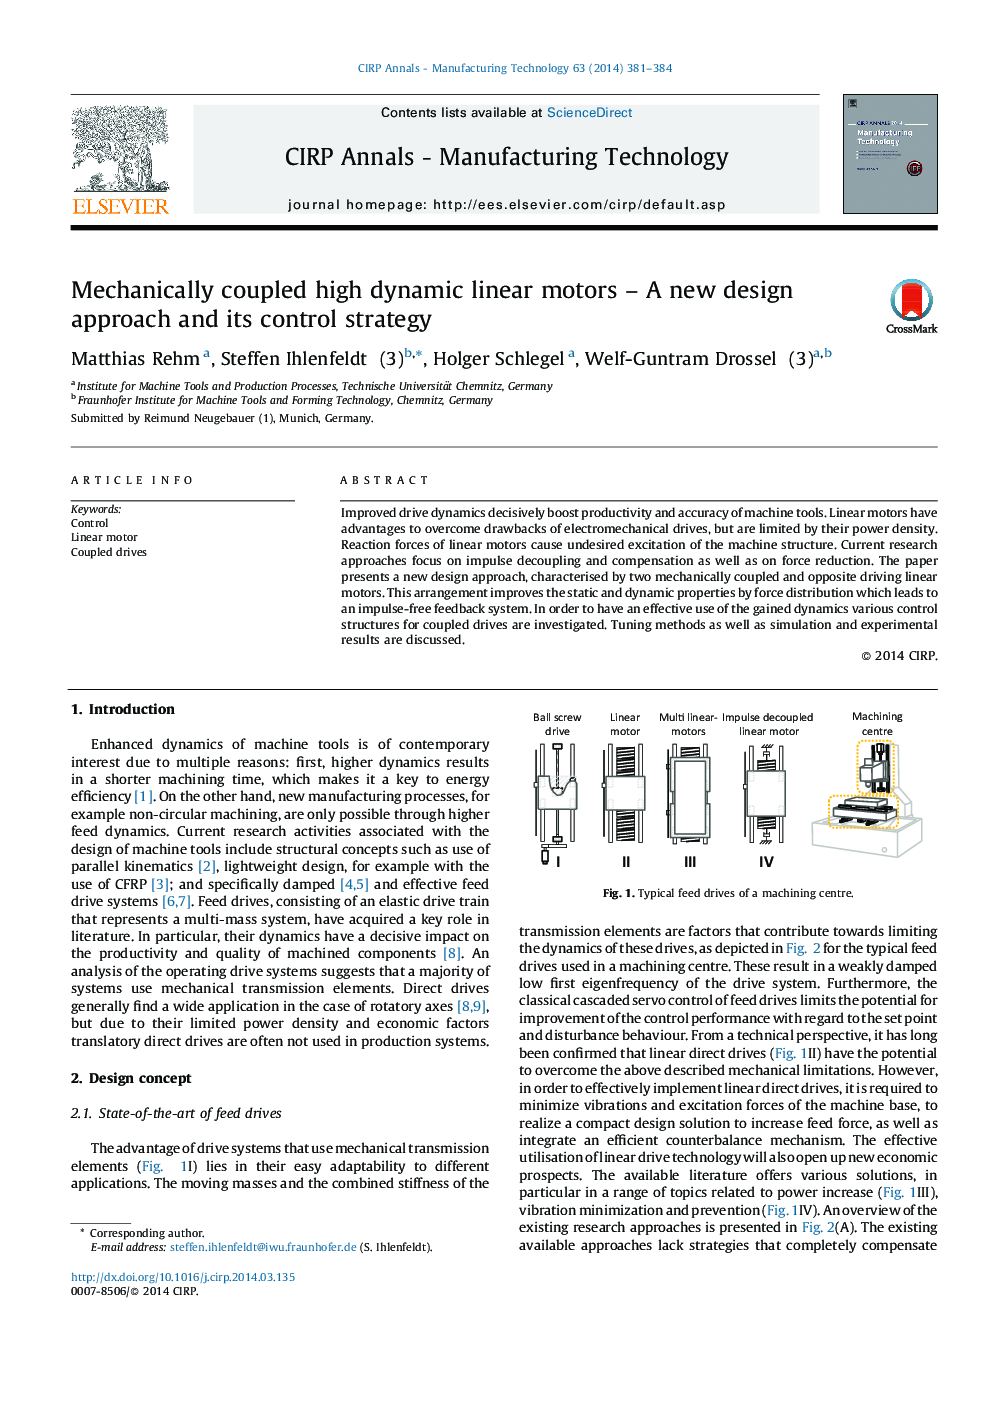 Mechanically coupled high dynamic linear motors – A new design approach and its control strategy